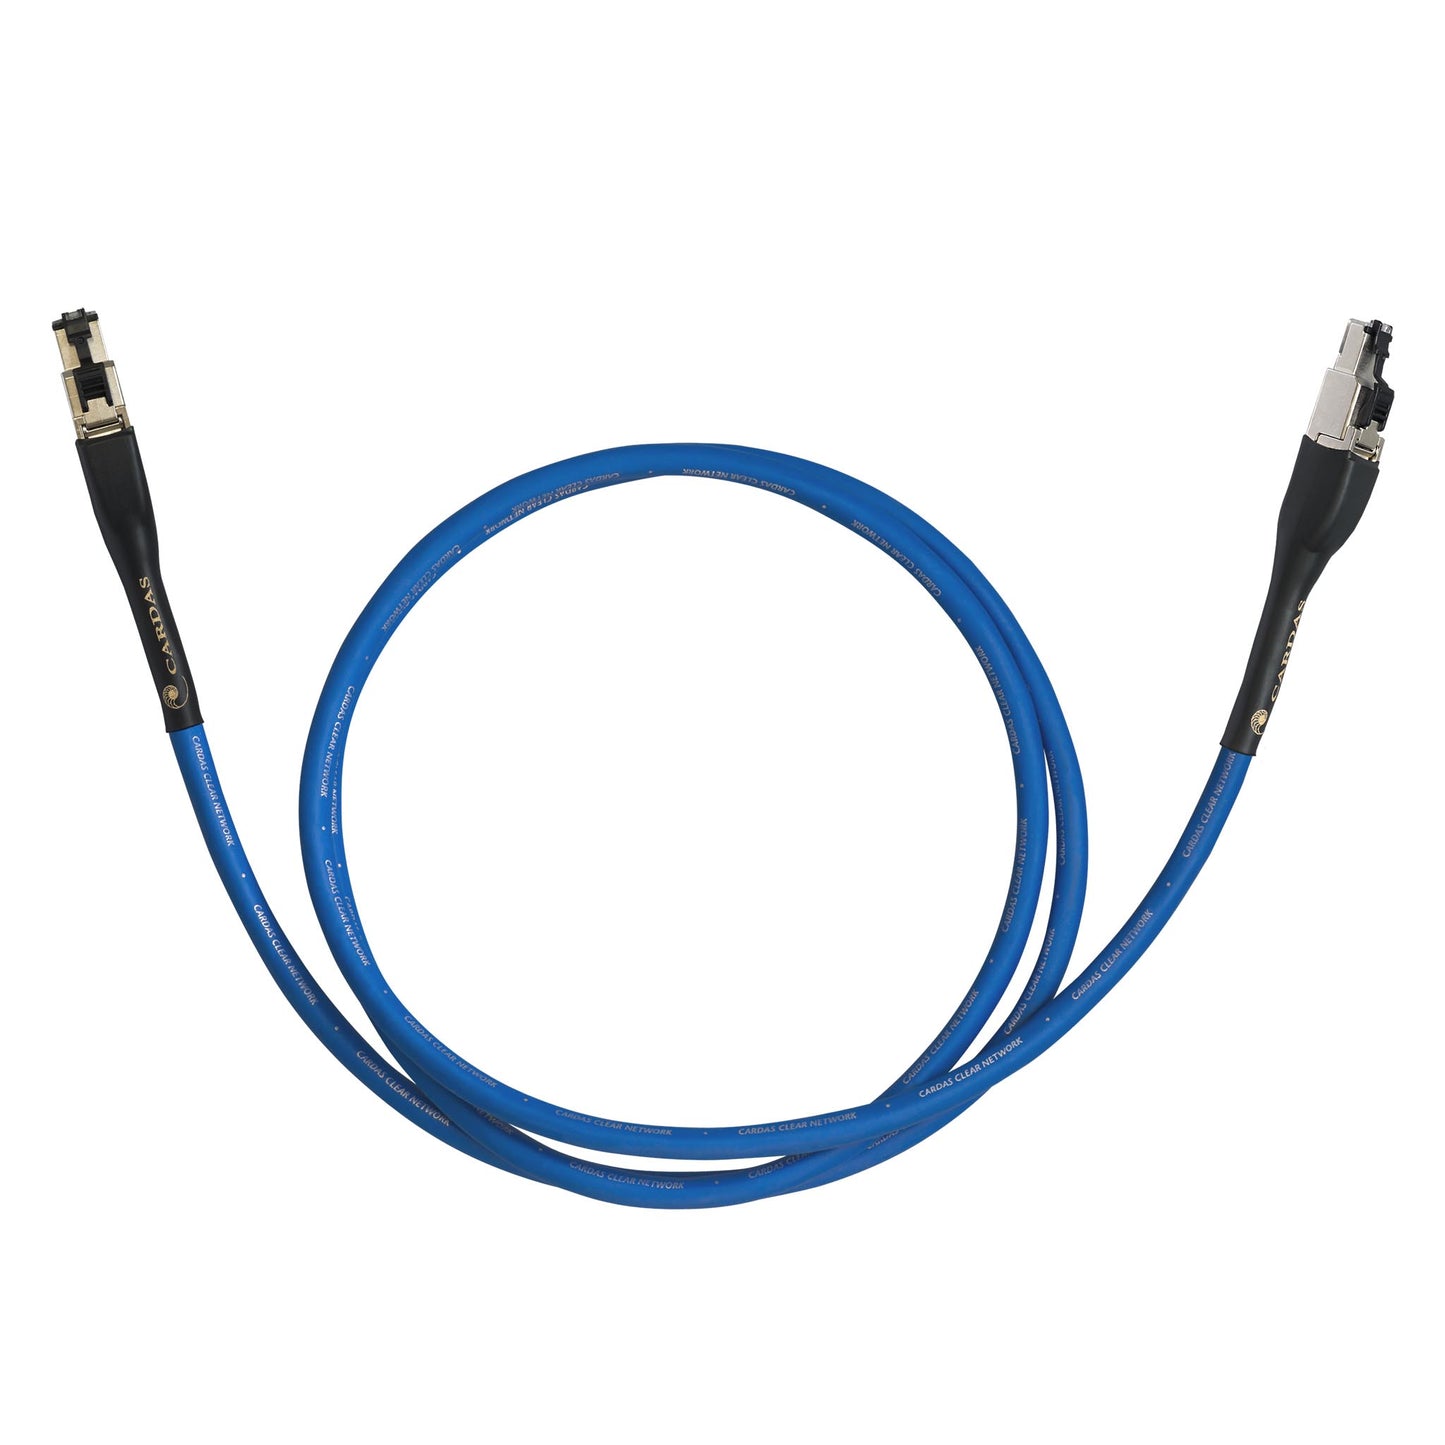 Cardas Clear Network CAT-7 Ethernet Cable – Upscale Audio